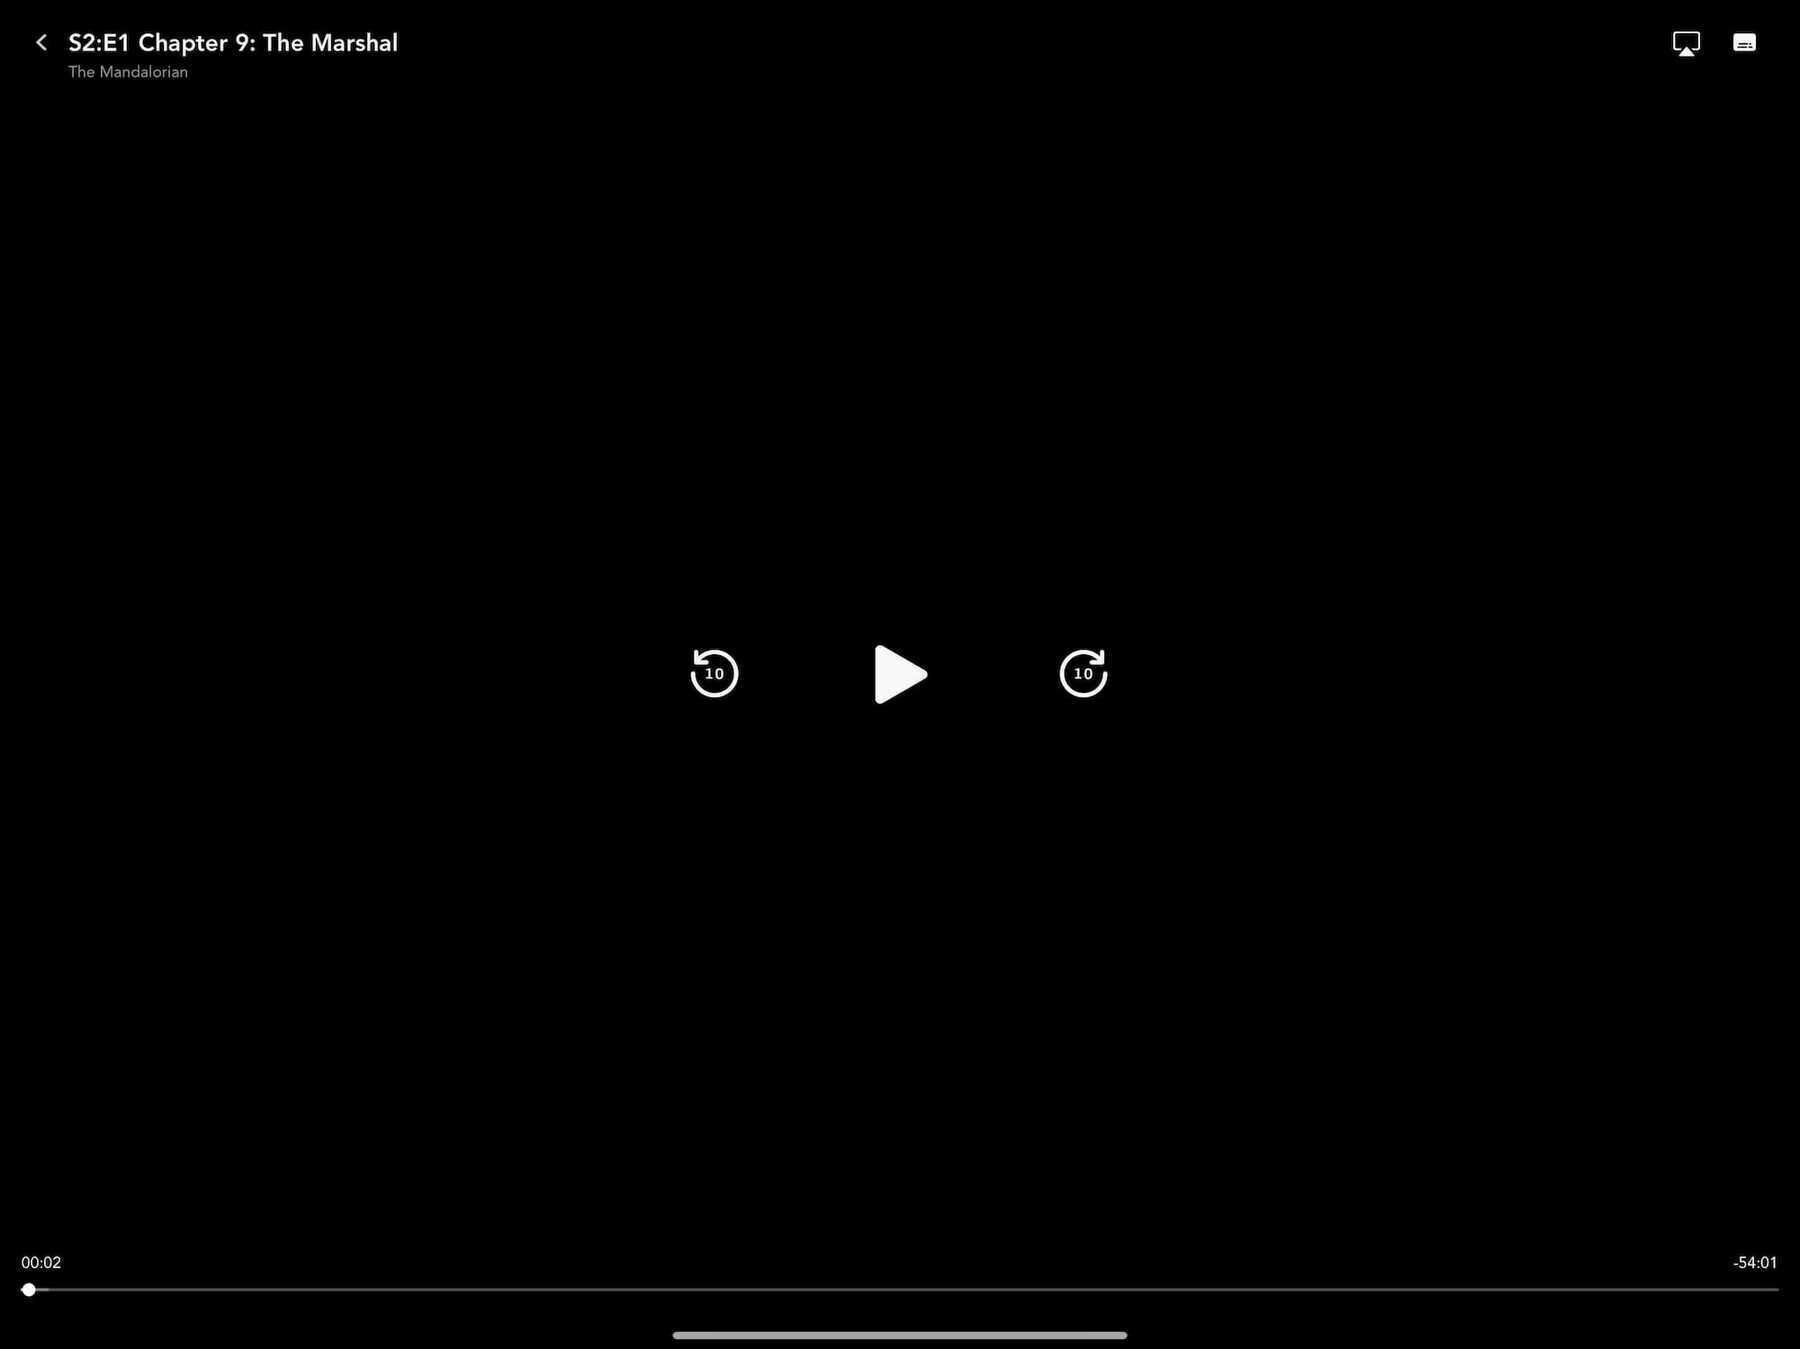 The Disney+ player interface.